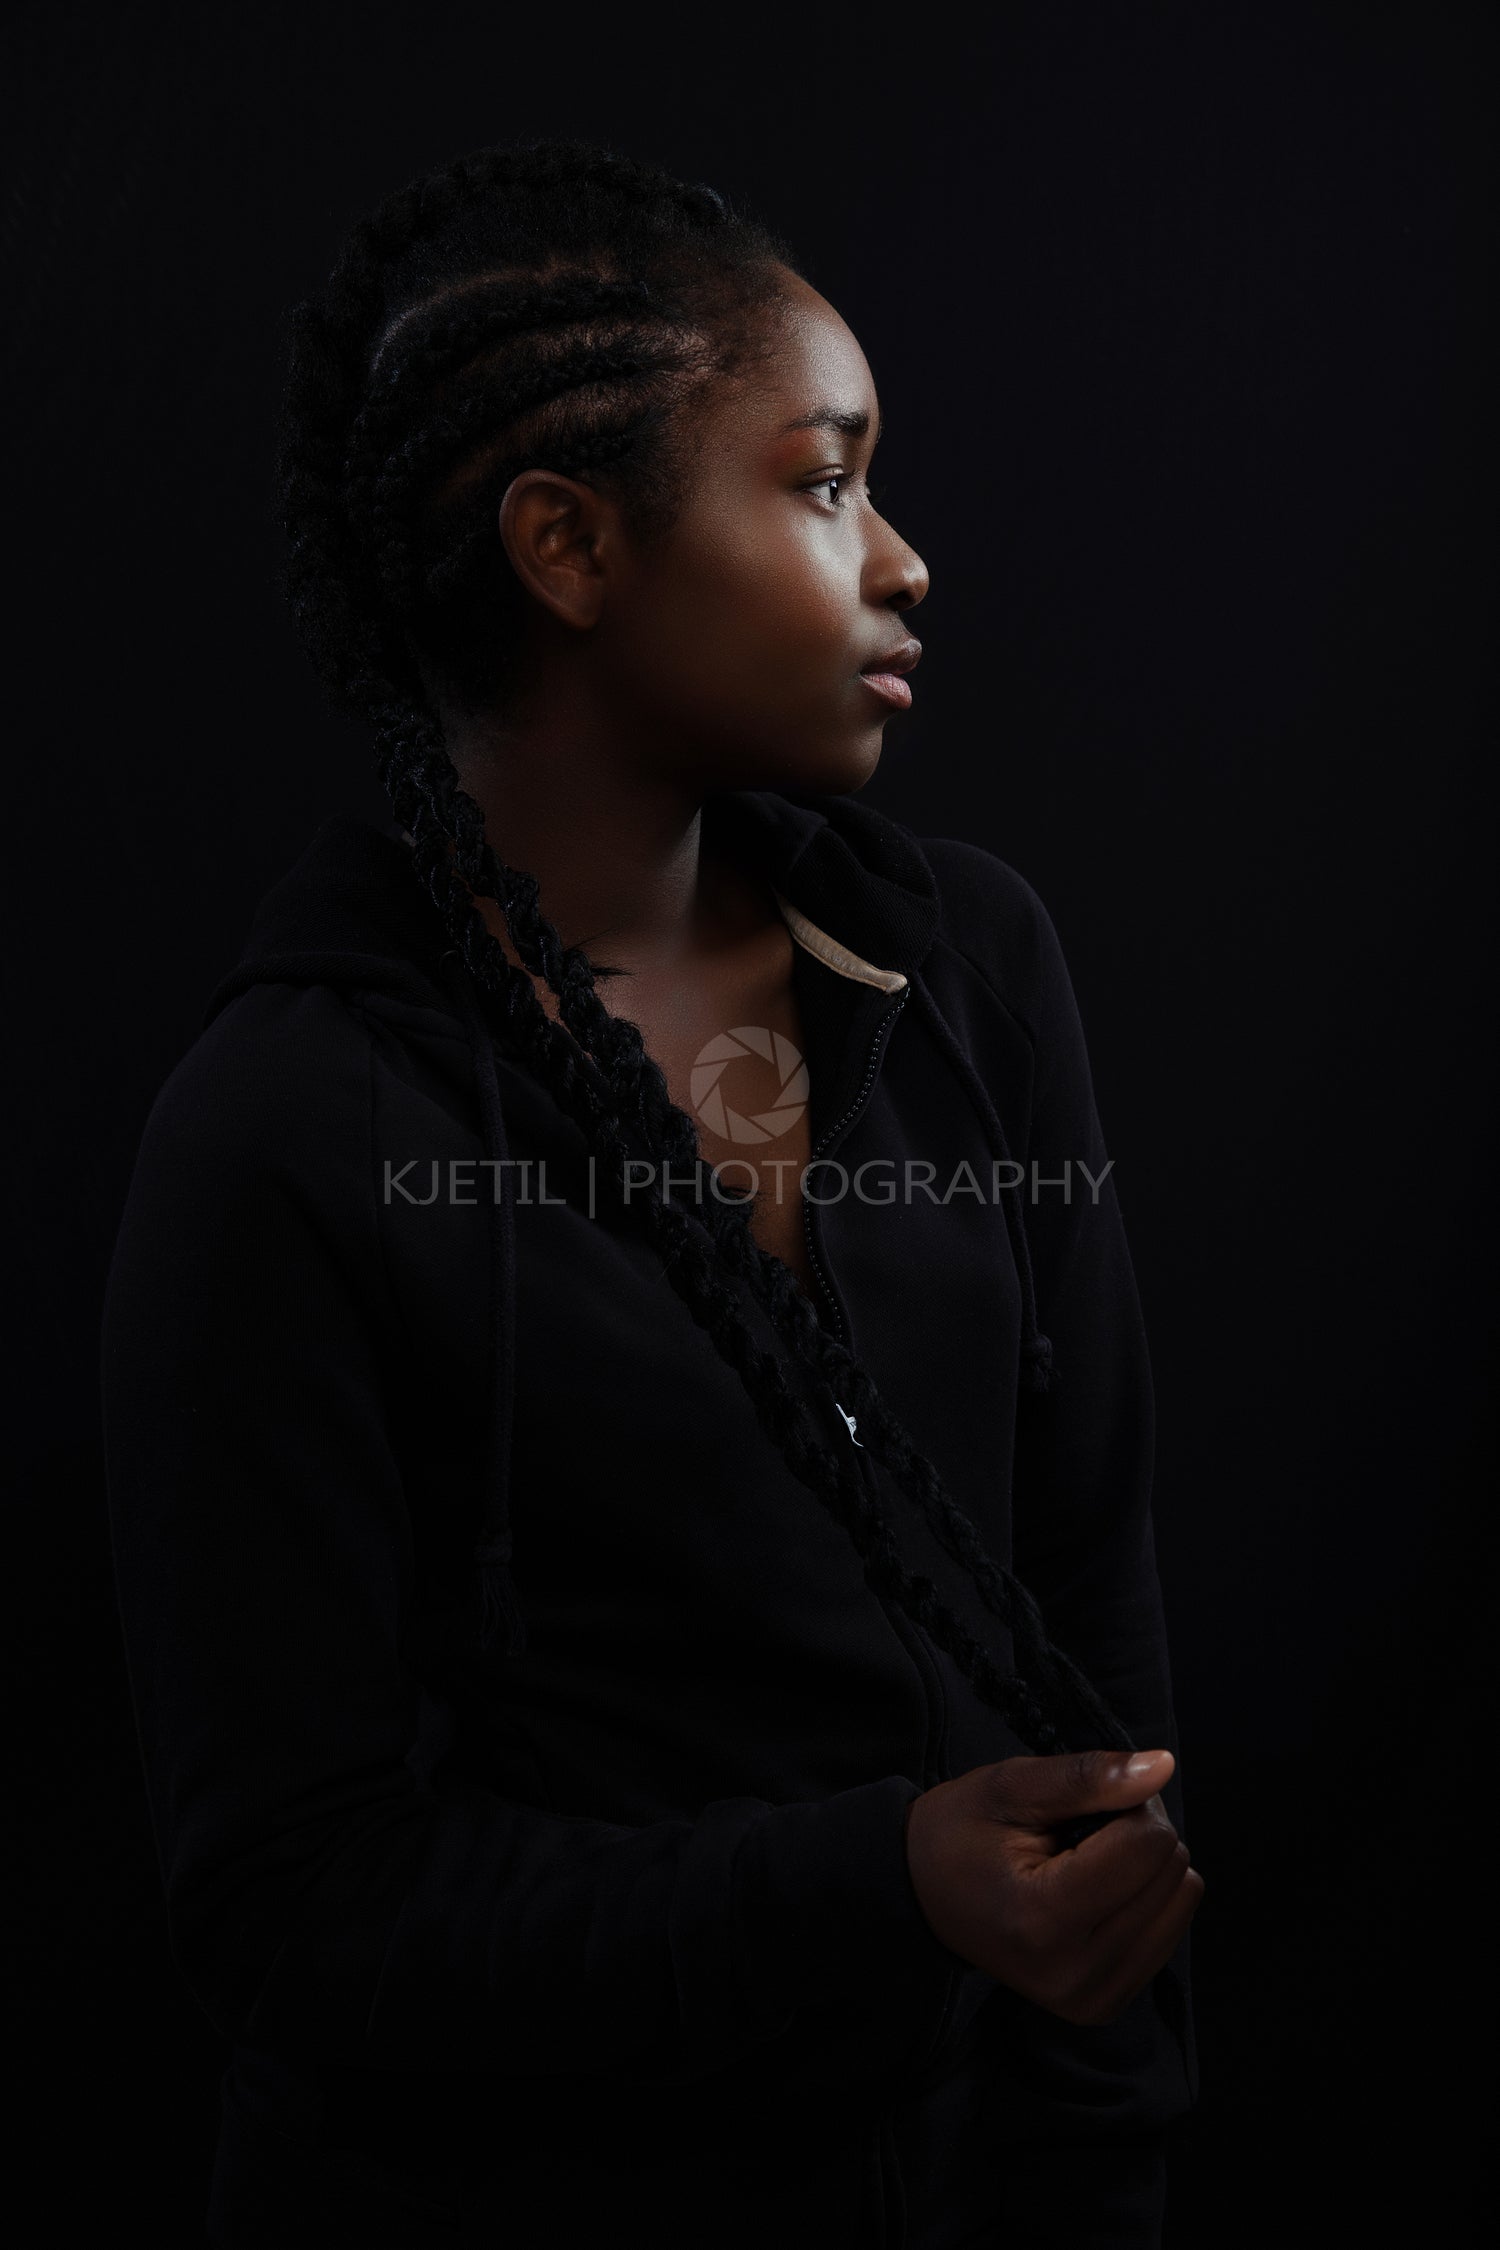 Confident woman with dark skin and cool attitude wearing hoody